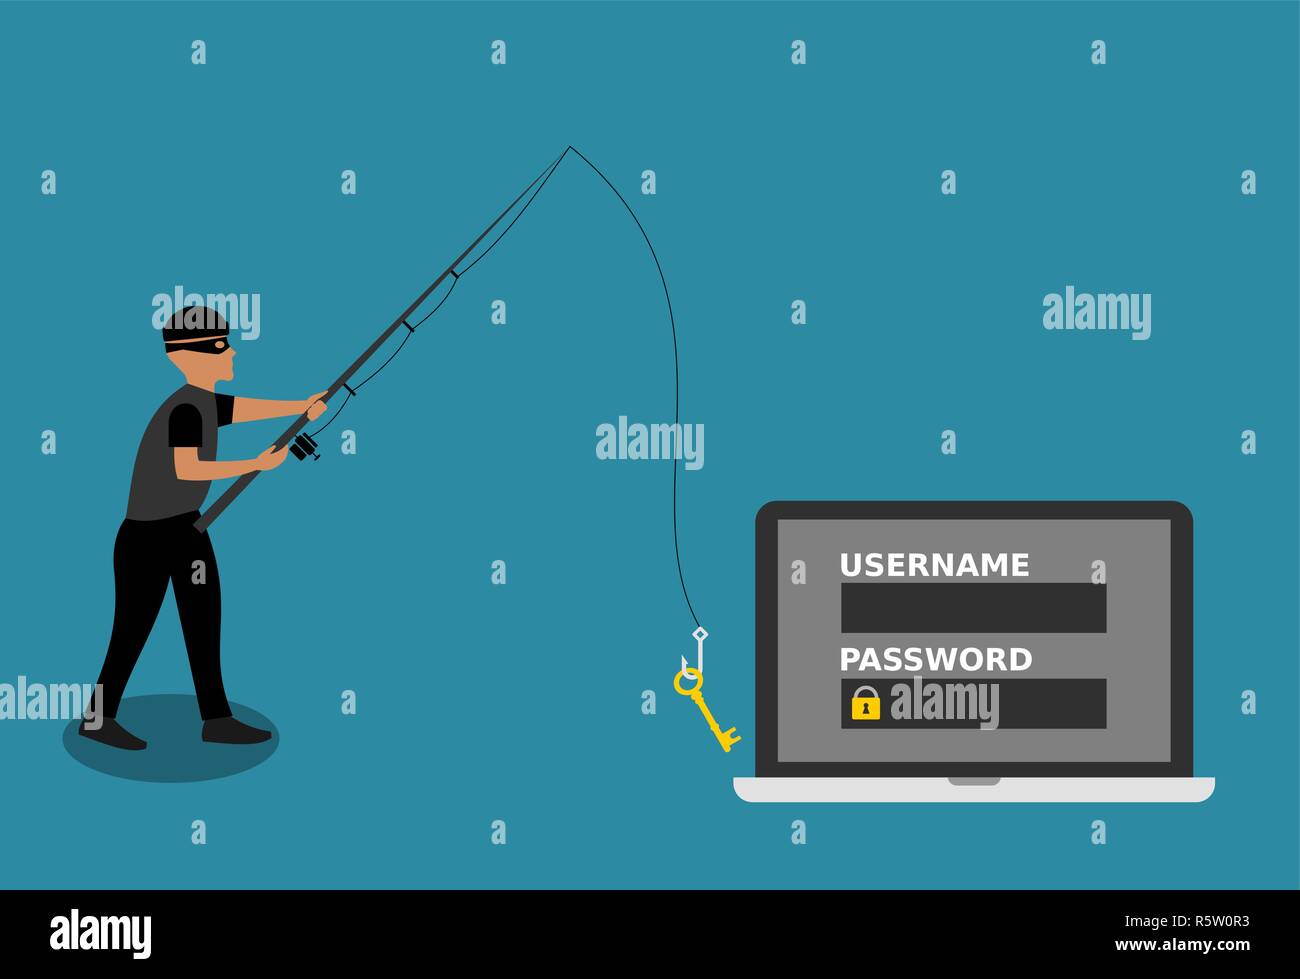 https://c8.alamy.com/comp/R5W0R3/a-cyber-thief-is-stealing-password-with-fishing-rod-from-the-laptop-online-fraud-conceptphishing-attack-fishing-hacker-web-security-cyber-thief-R5W0R3.jpg